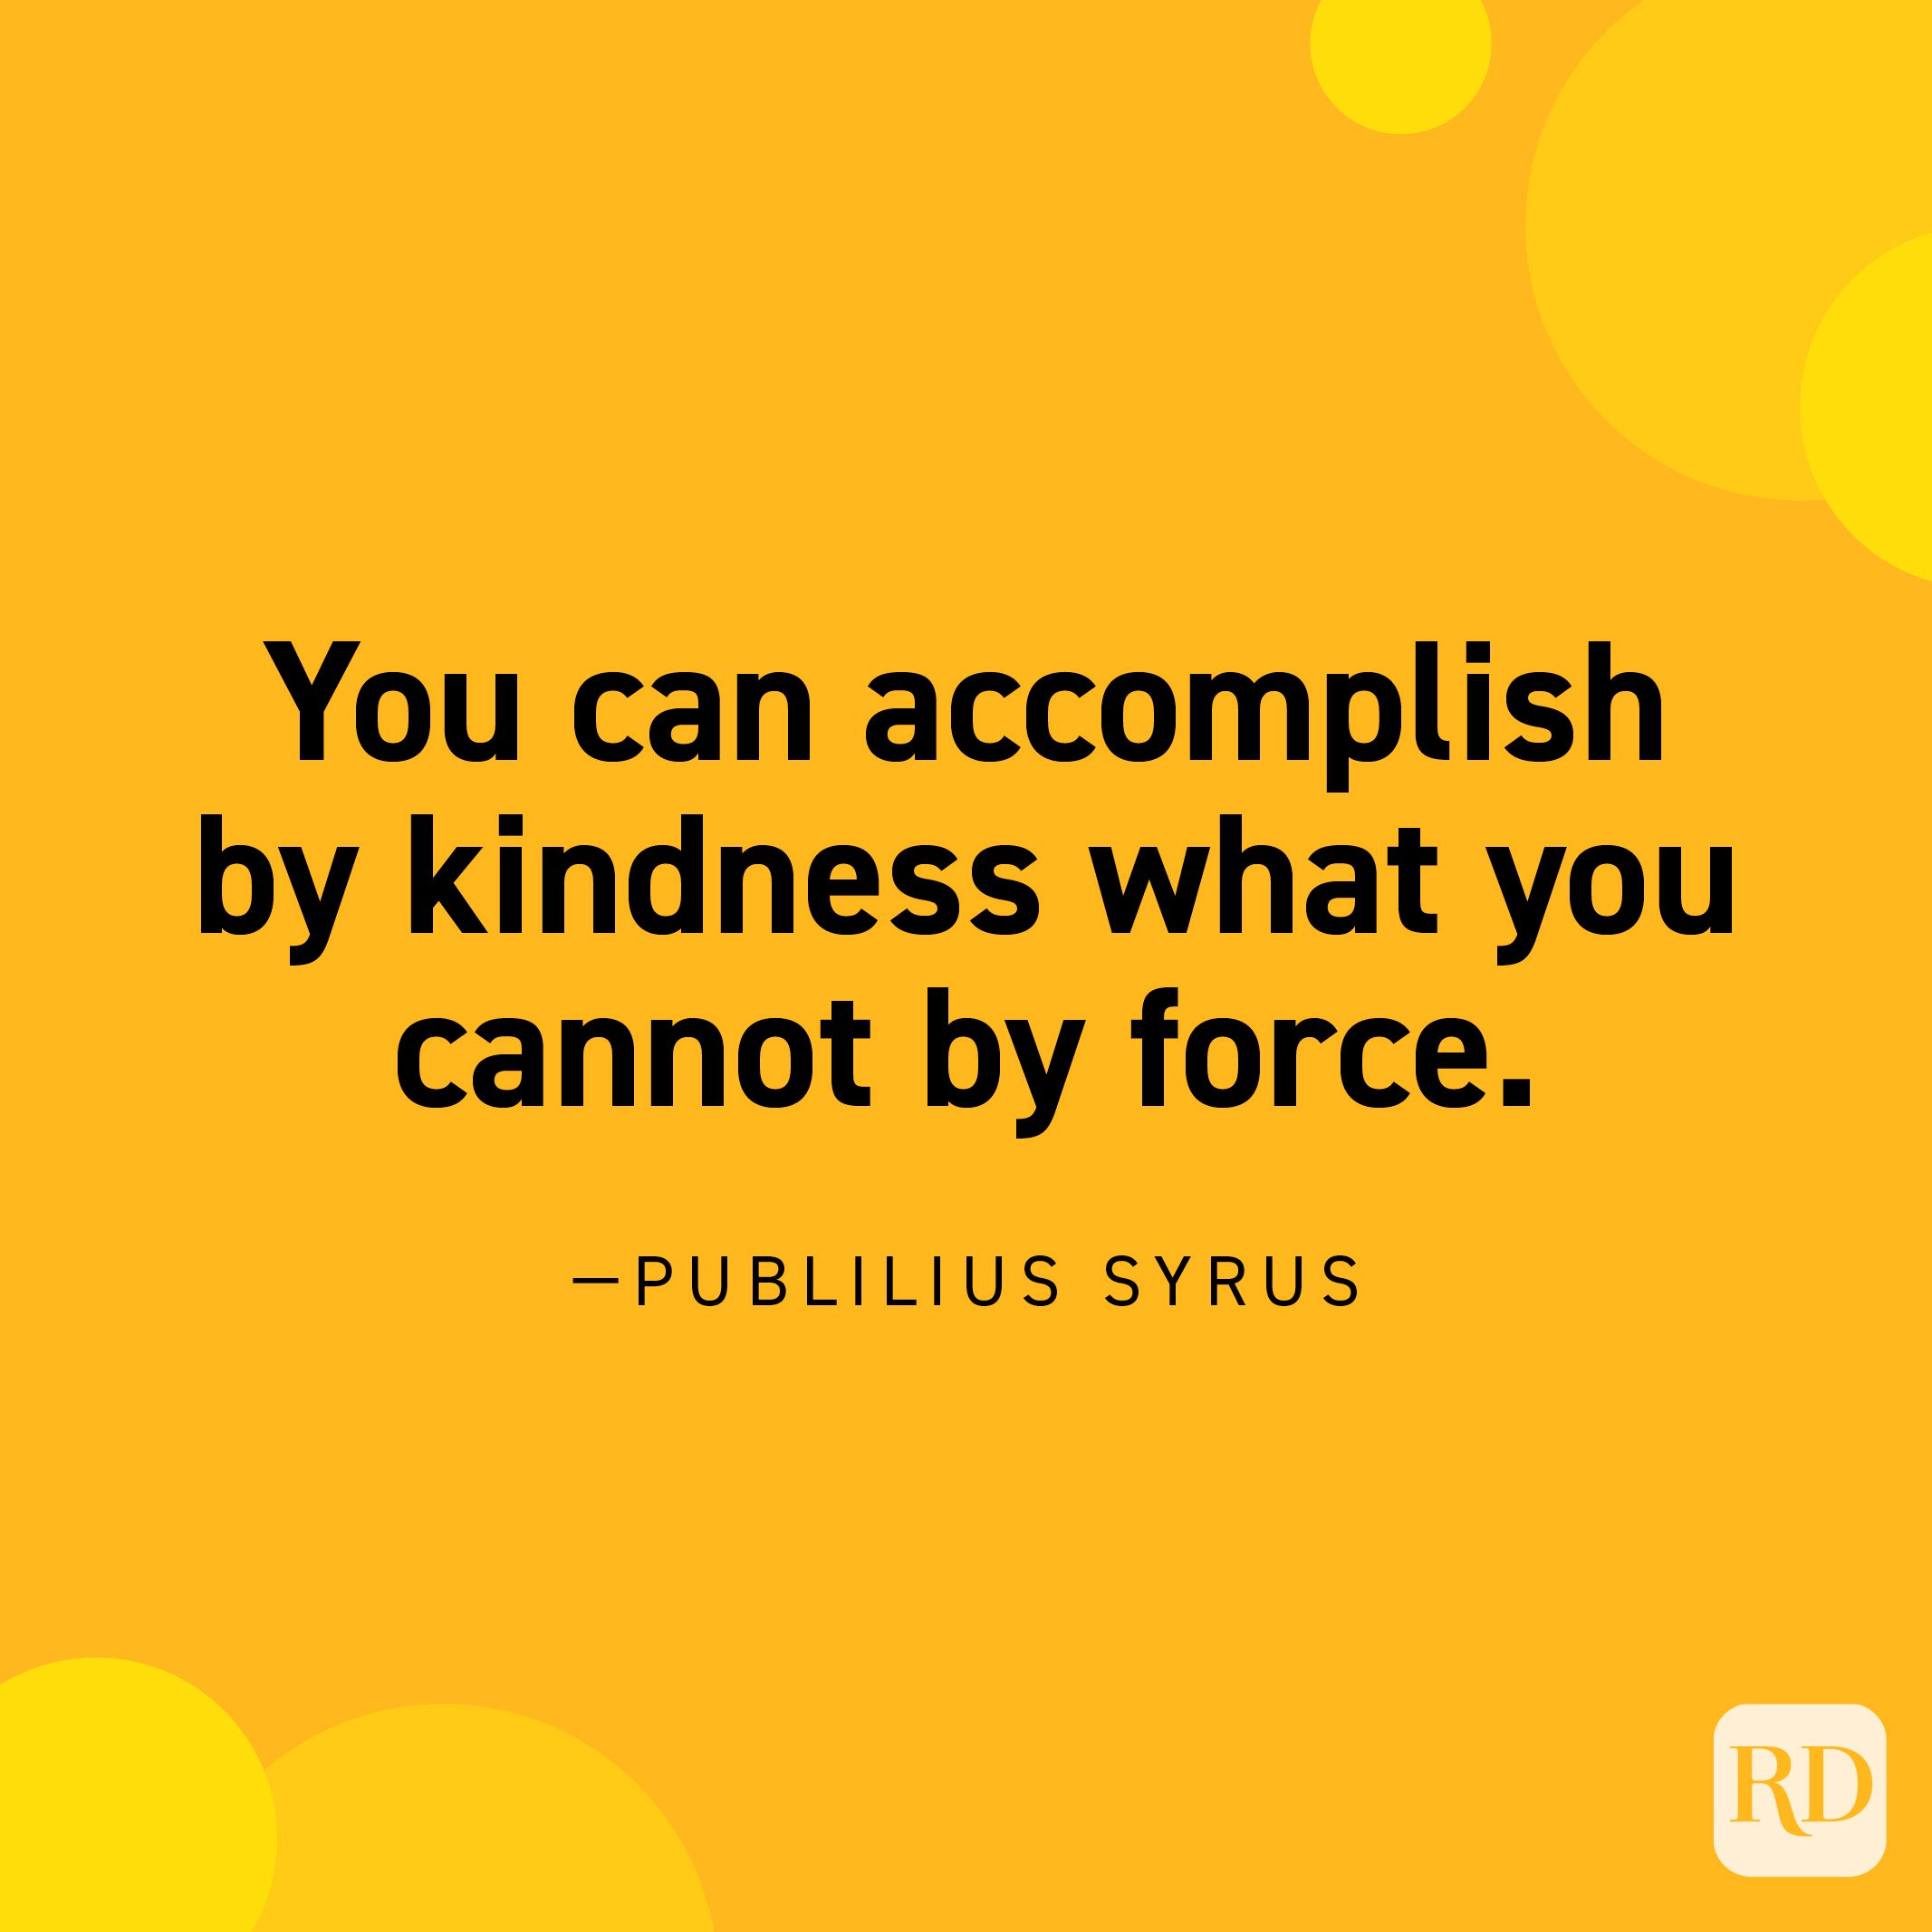 60 Kindness Quotes That Will Stay With You | Reader's Digest